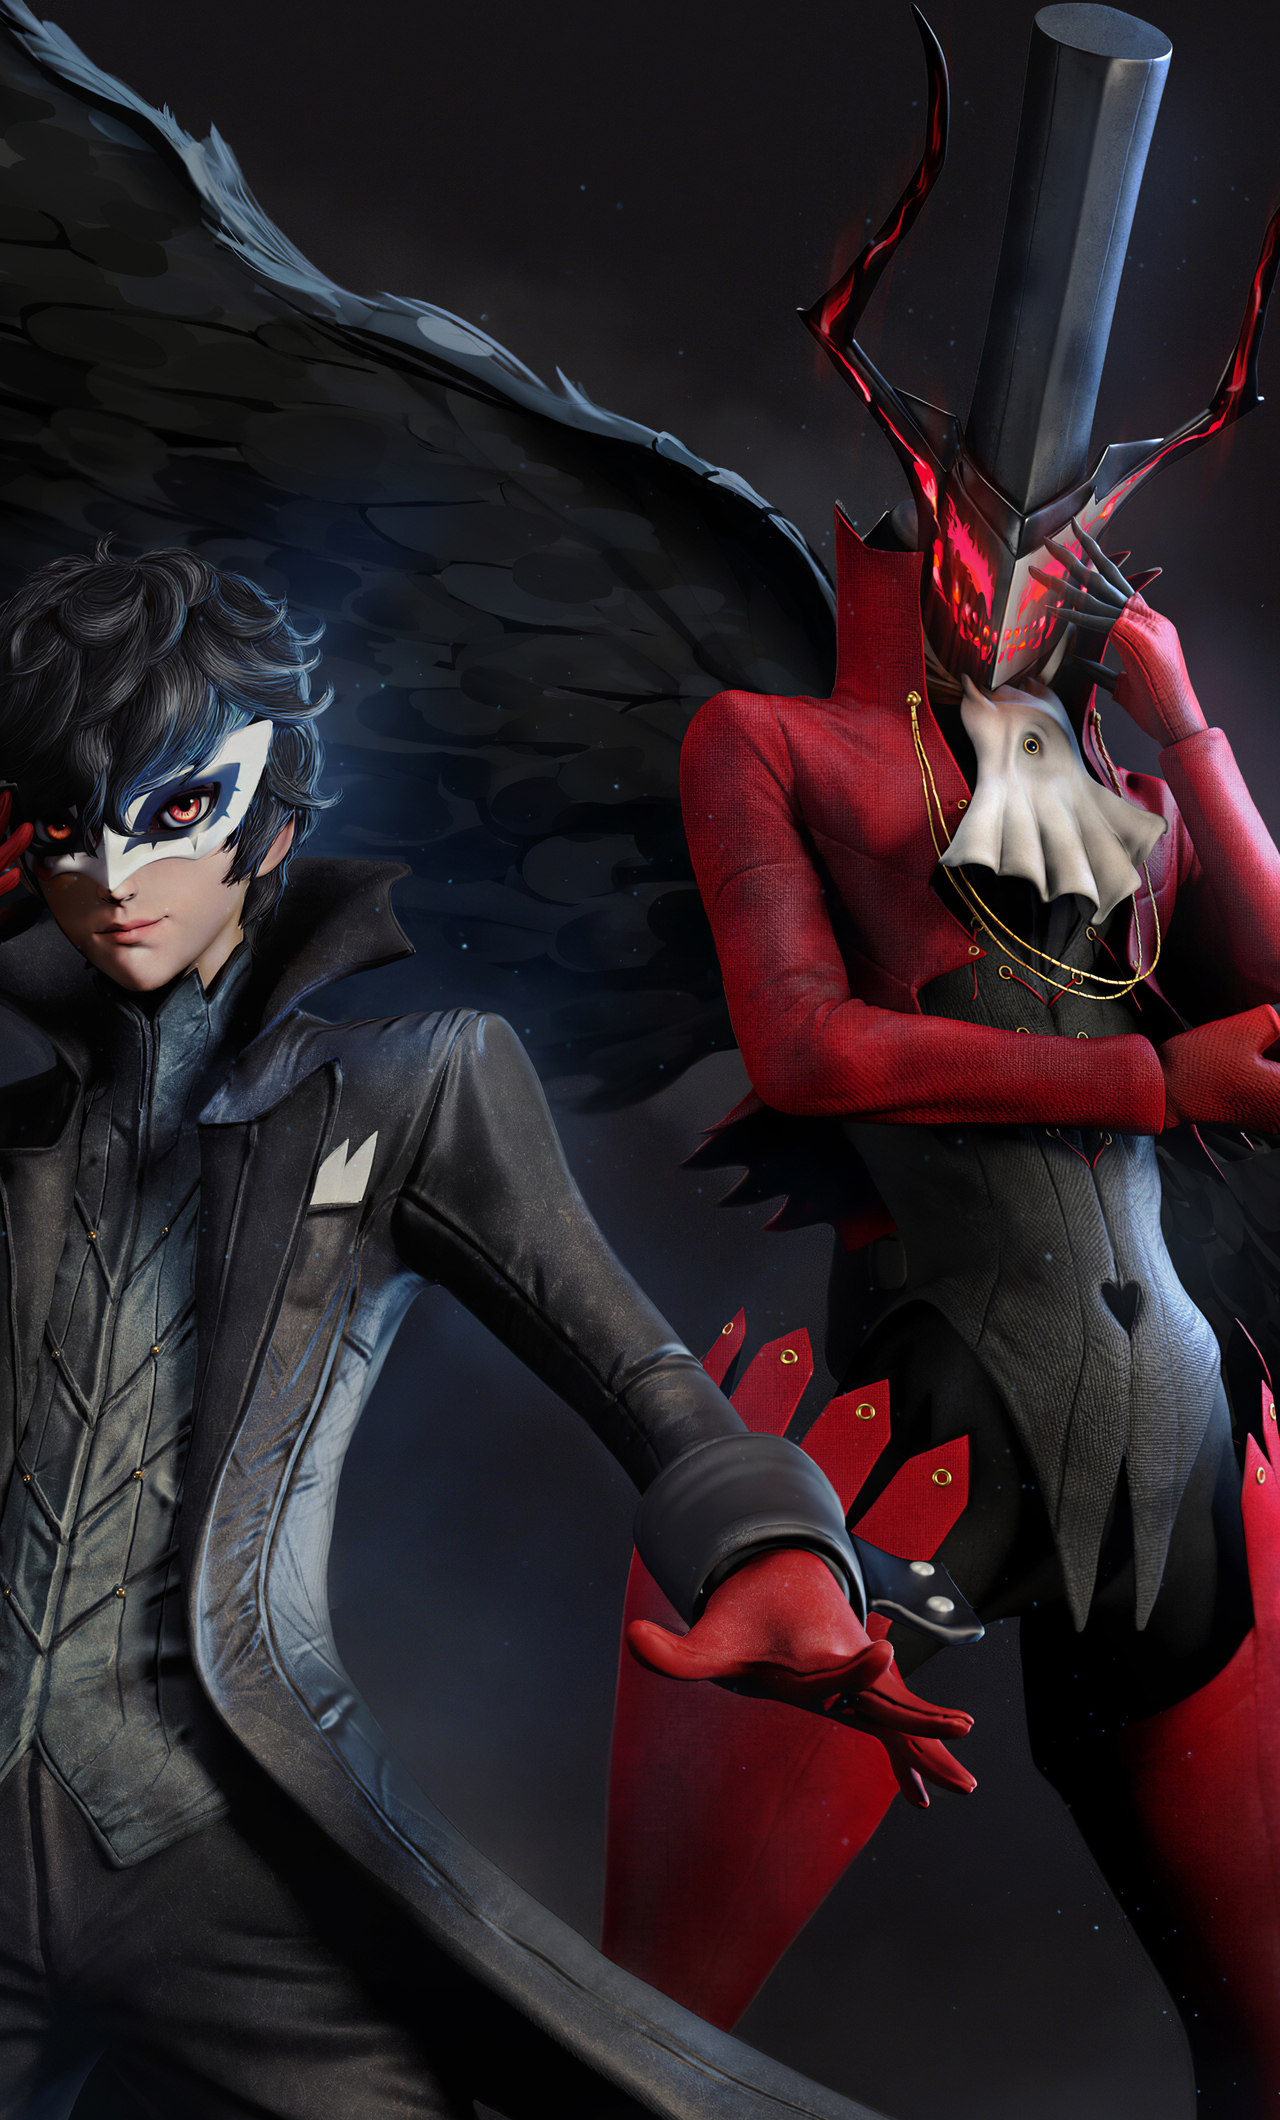 1280x21 Joker And Arsene From Persona 5 Iphone 6 Hd 4k Wallpapers Images Backgrounds Photos And Pictures